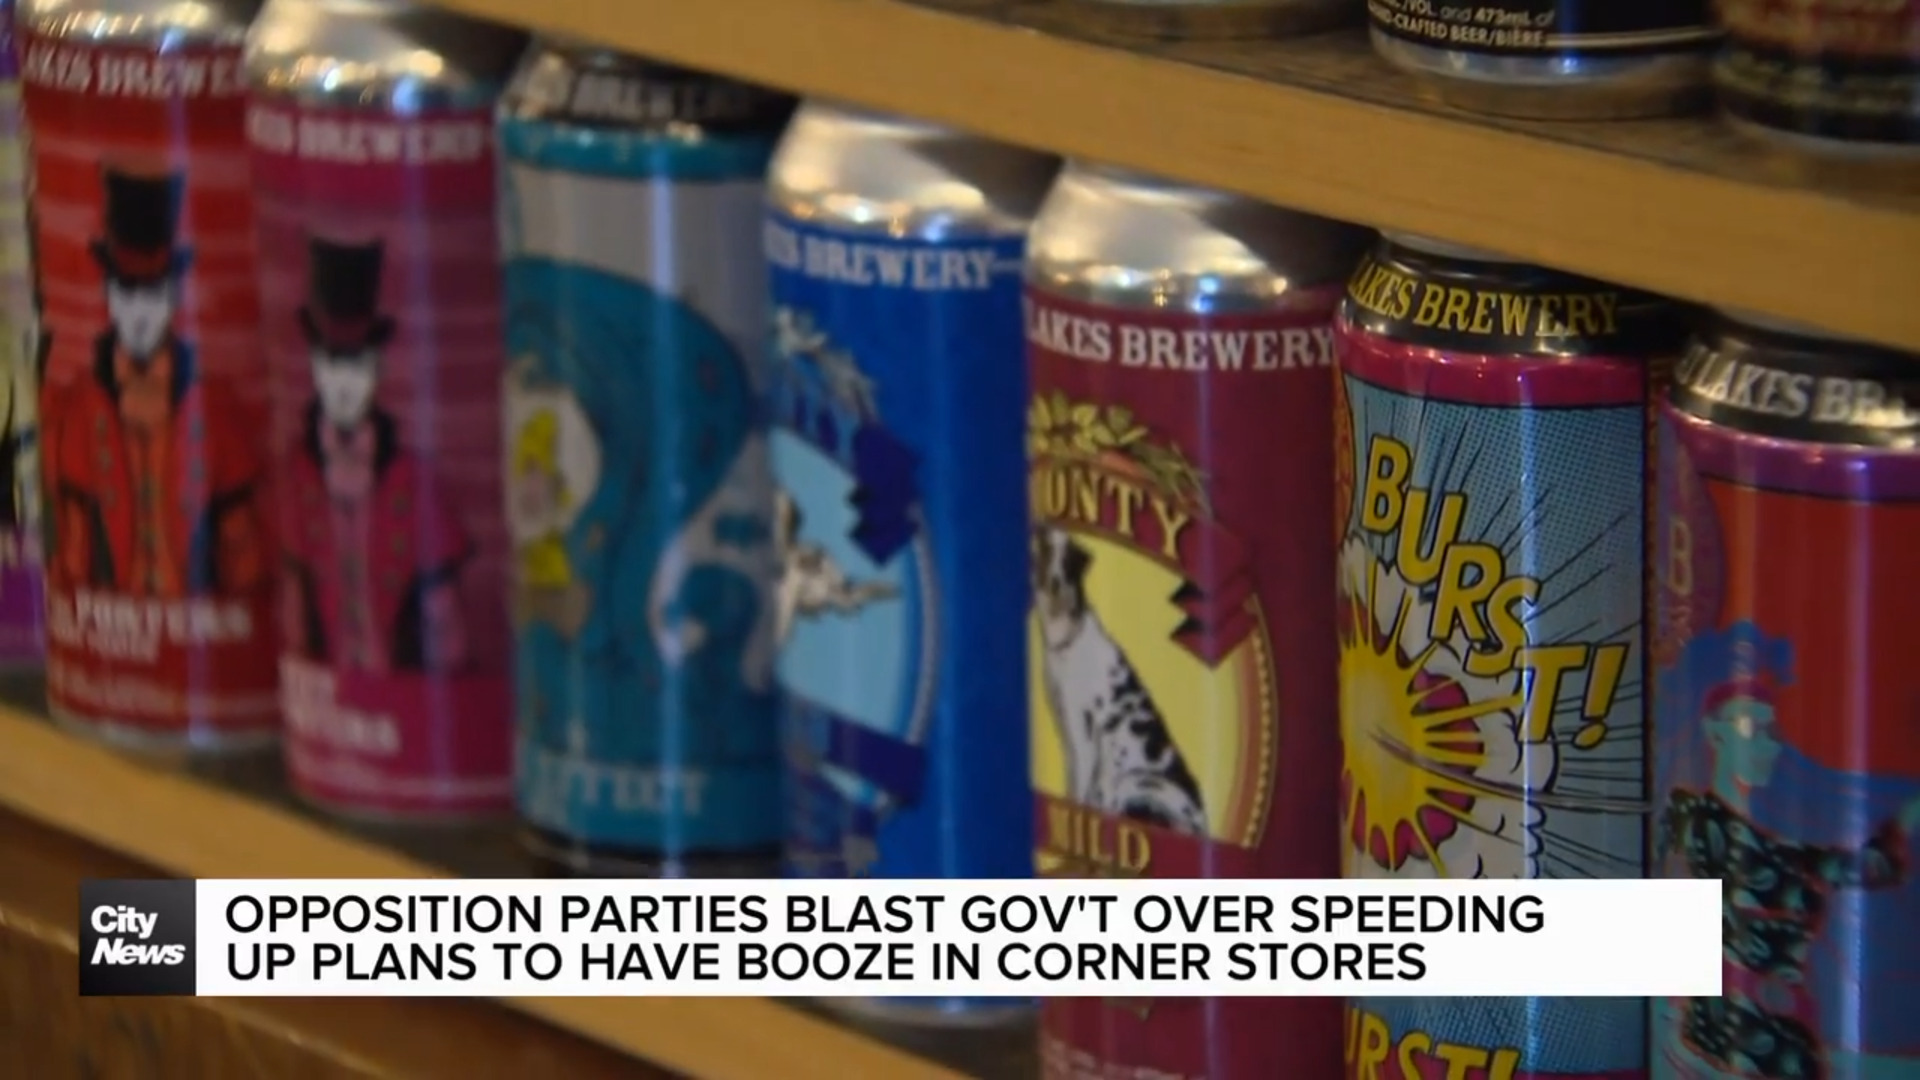 Ford government questioned over cost of booze in corner stores plans